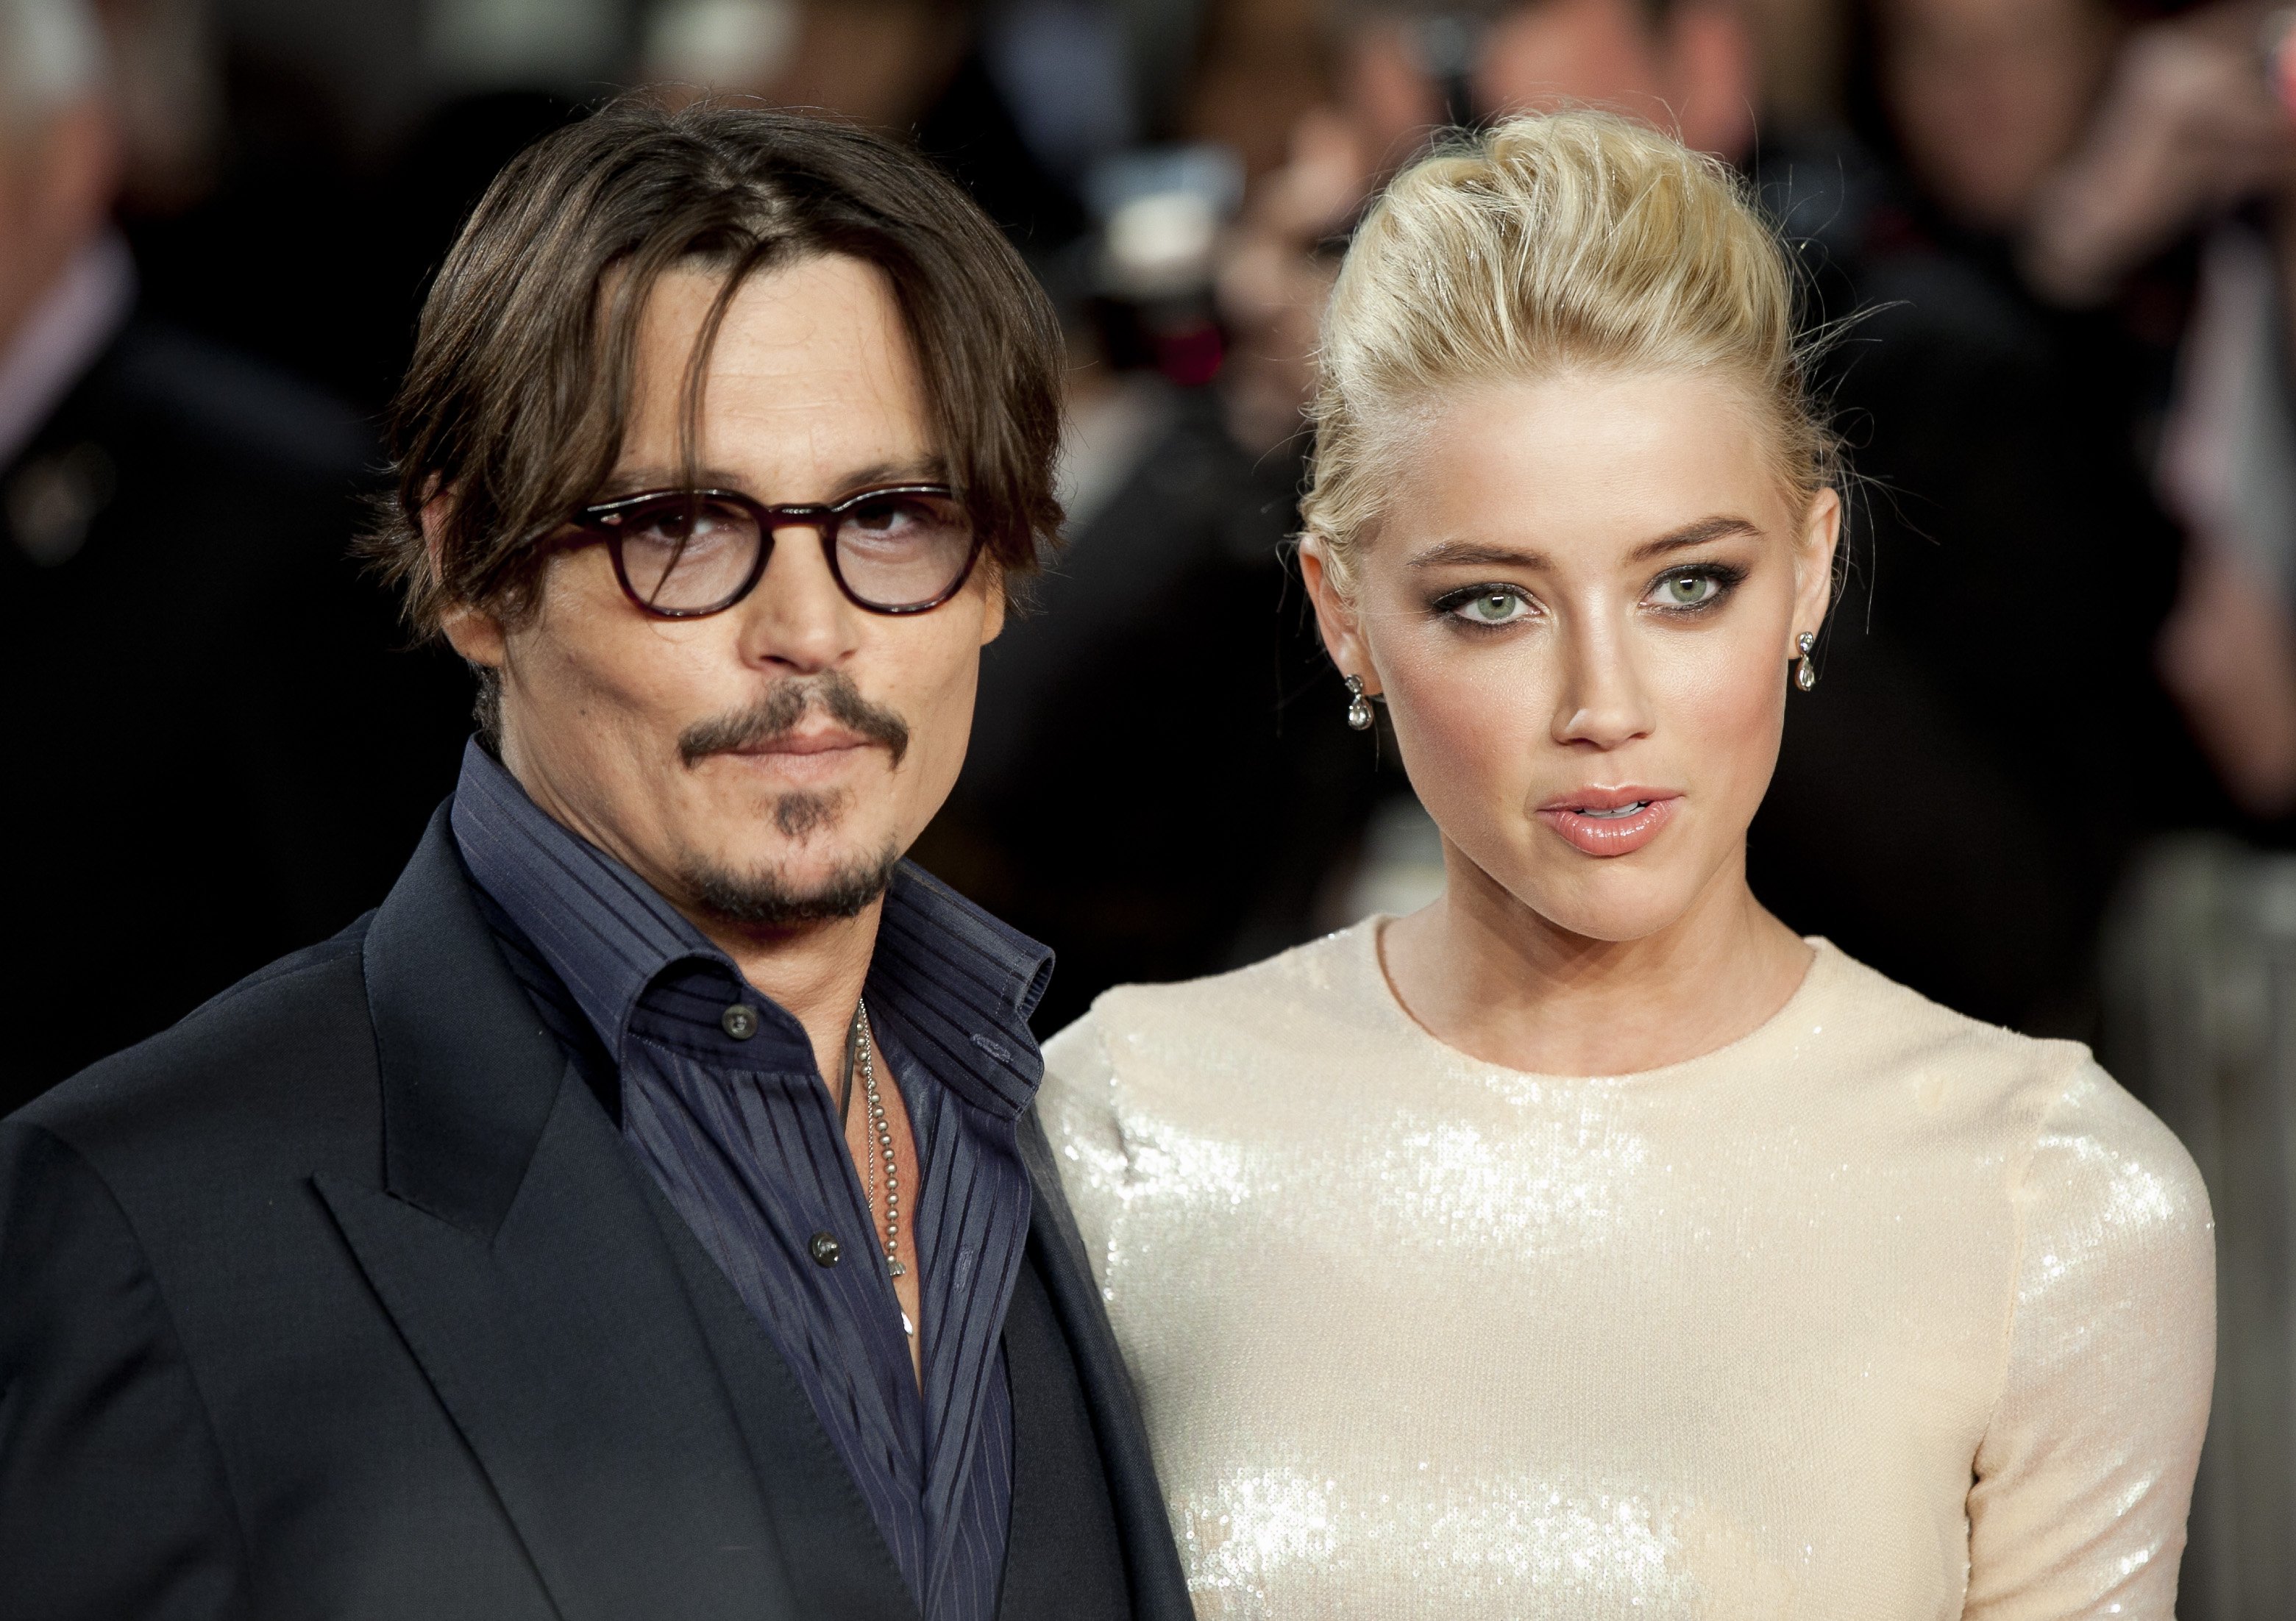 Johnny Depp and Amber Heard at the European premiere of "The Rum Diary" in Kensington, London, on November 3, 2011. | Source: Getty Images